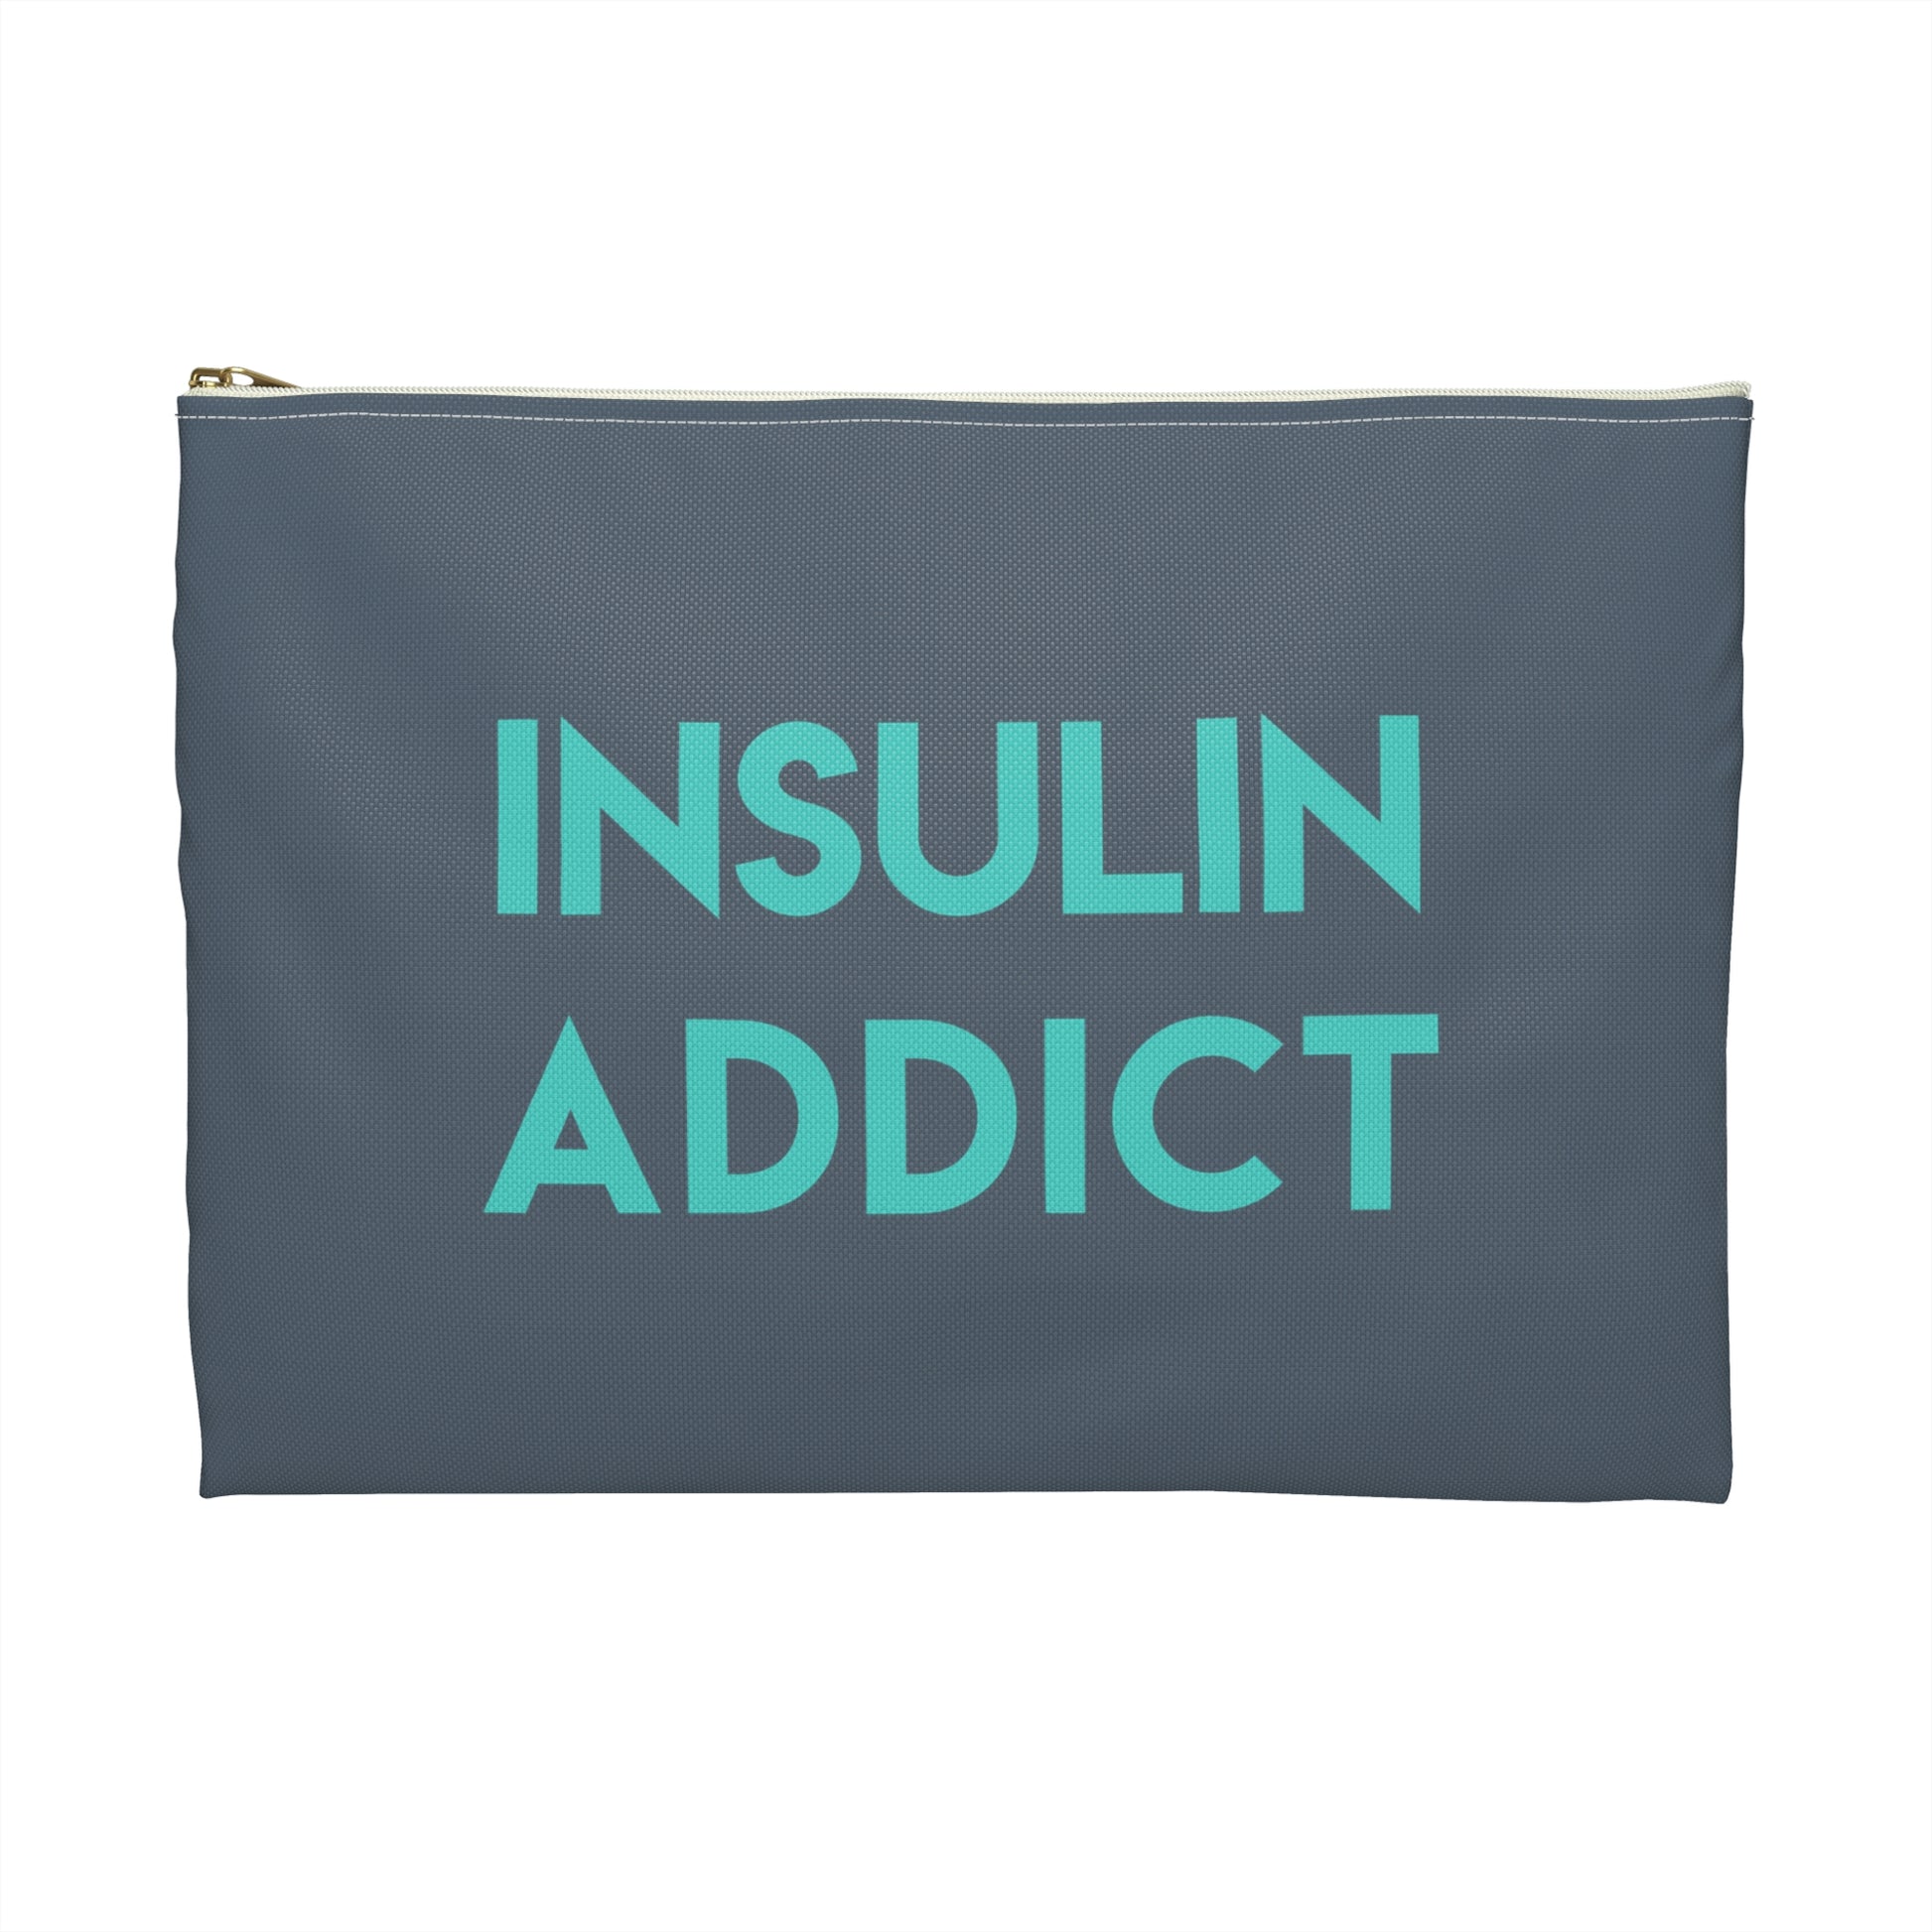 Insulin Addict Diabetes Bag, My Diabetic Supply Pouch Funny Case Type 1 2 One Accessory Zipper Travel Small Large Pouch Gift - Starcove Fashion